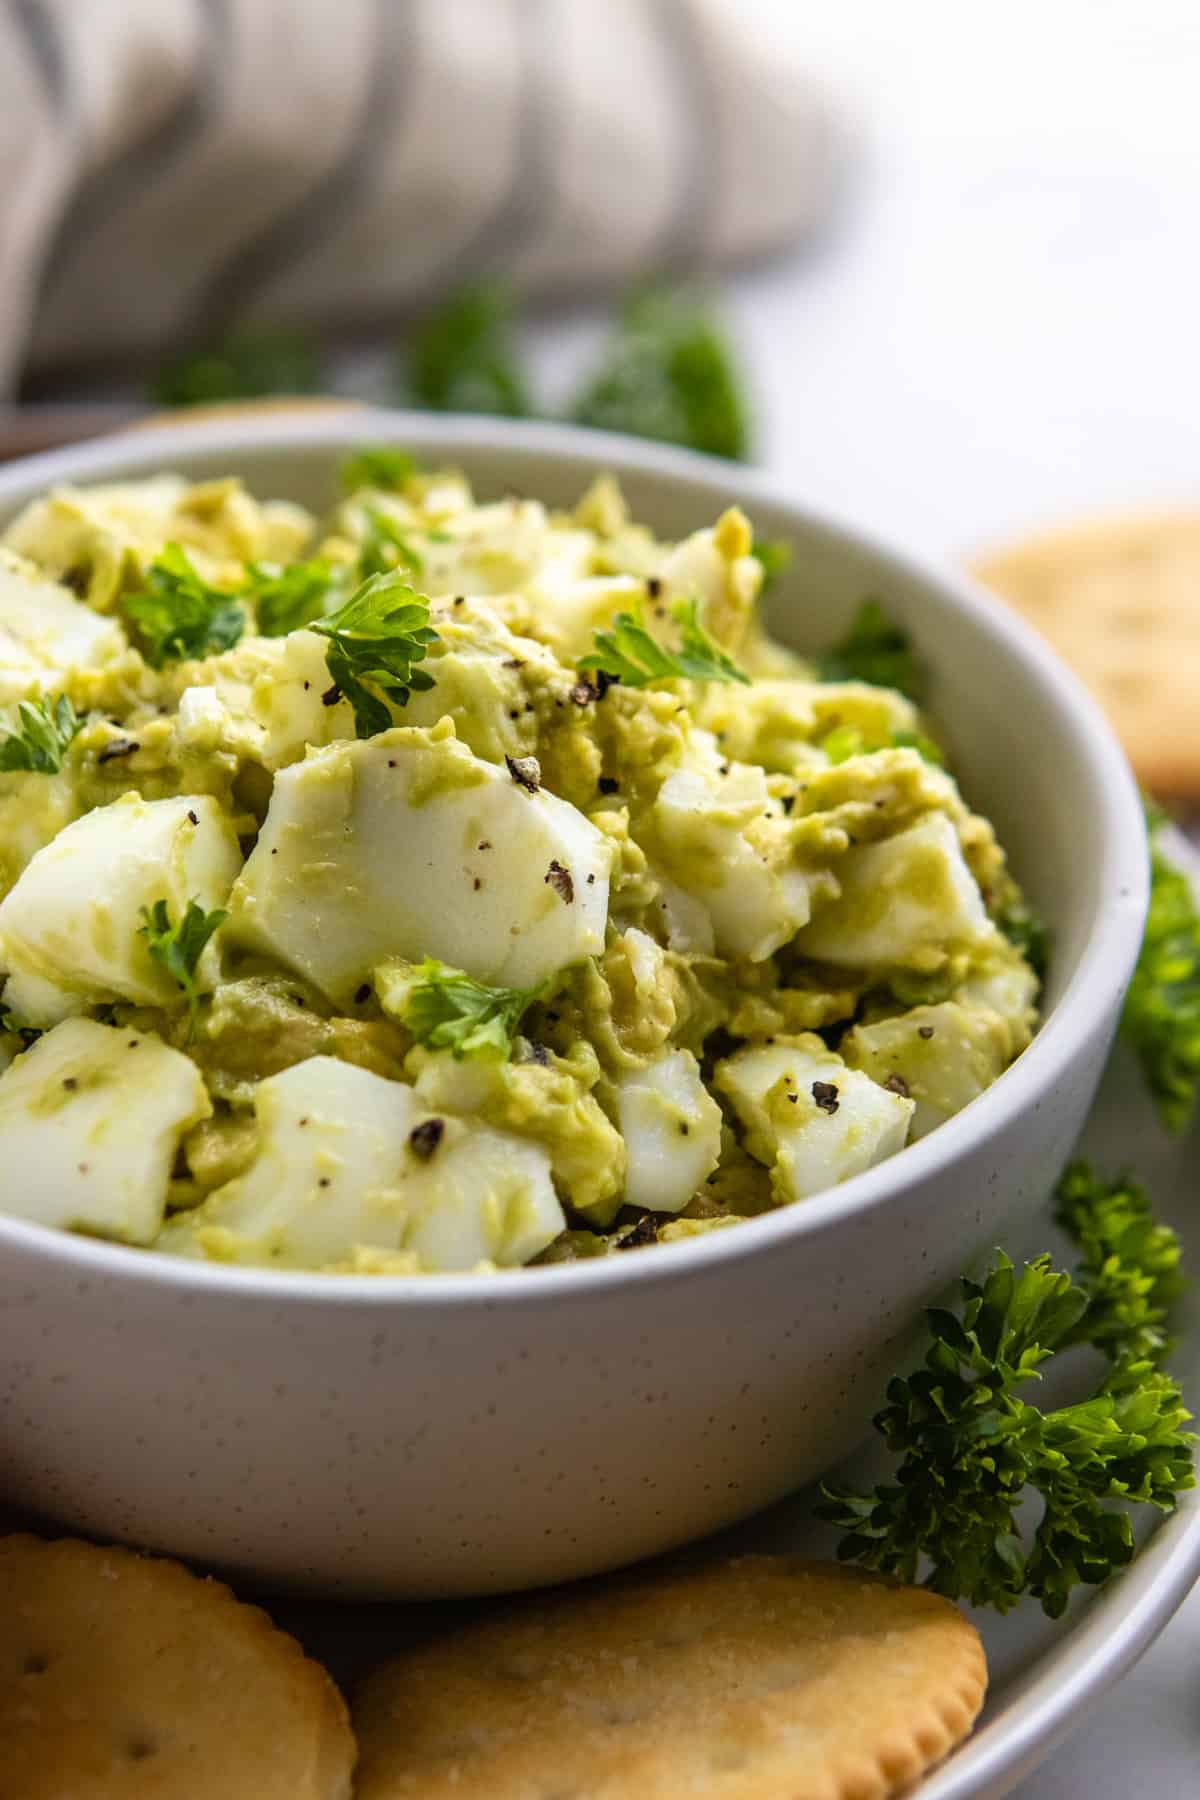 Avocado Egg Salad in bowl with crackers and fresh parsley.